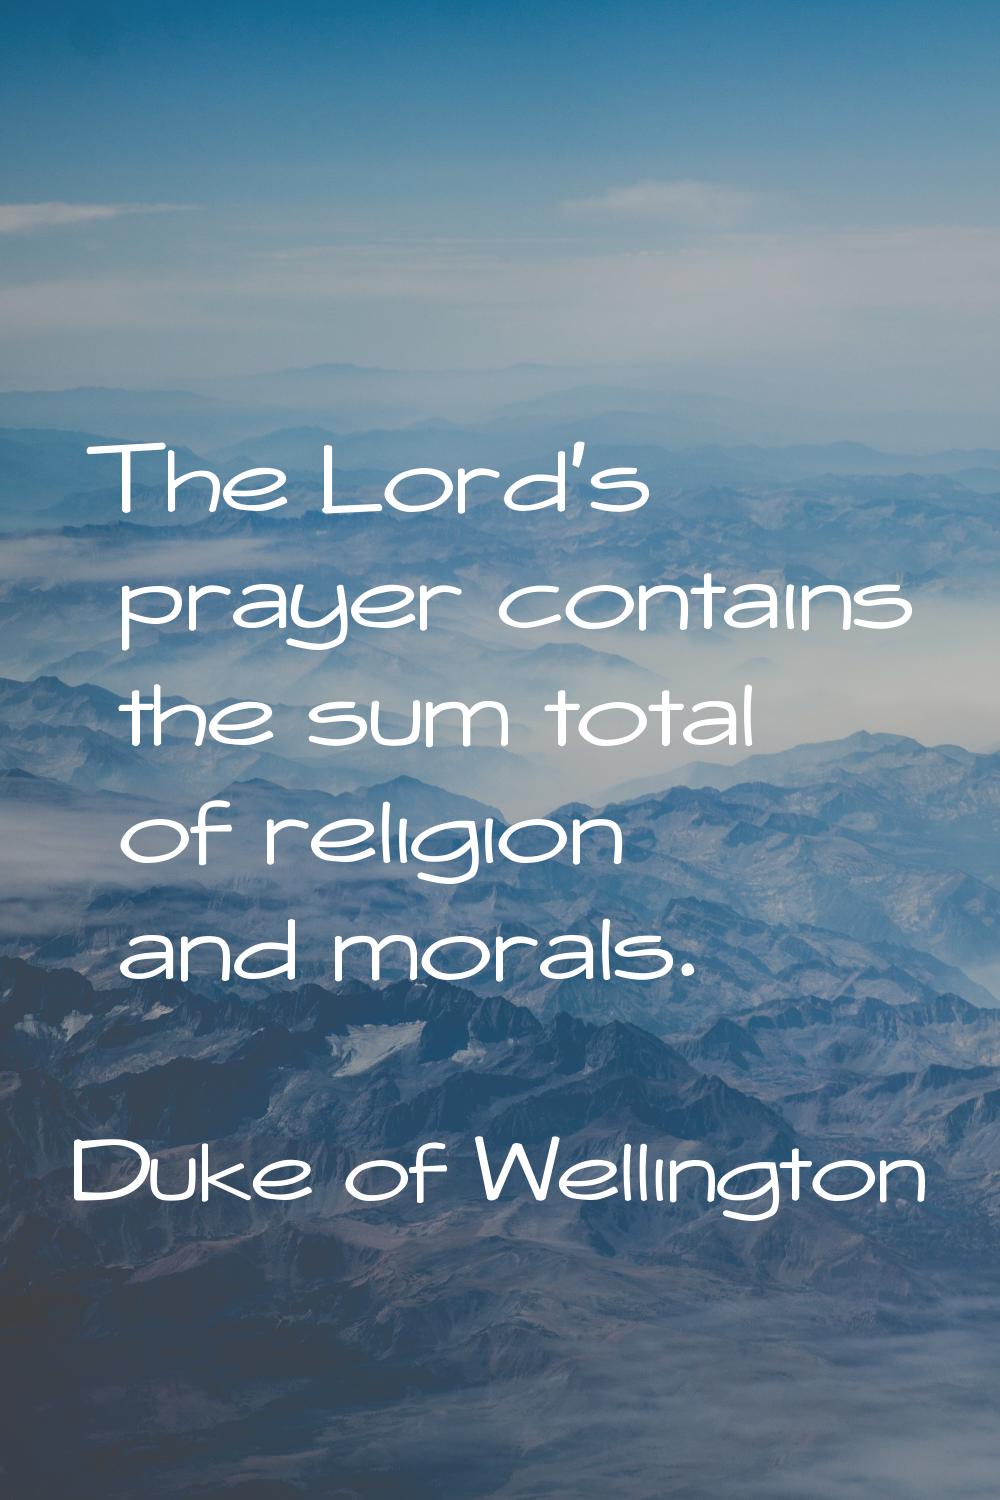 The Lord's prayer contains the sum total of religion and morals.